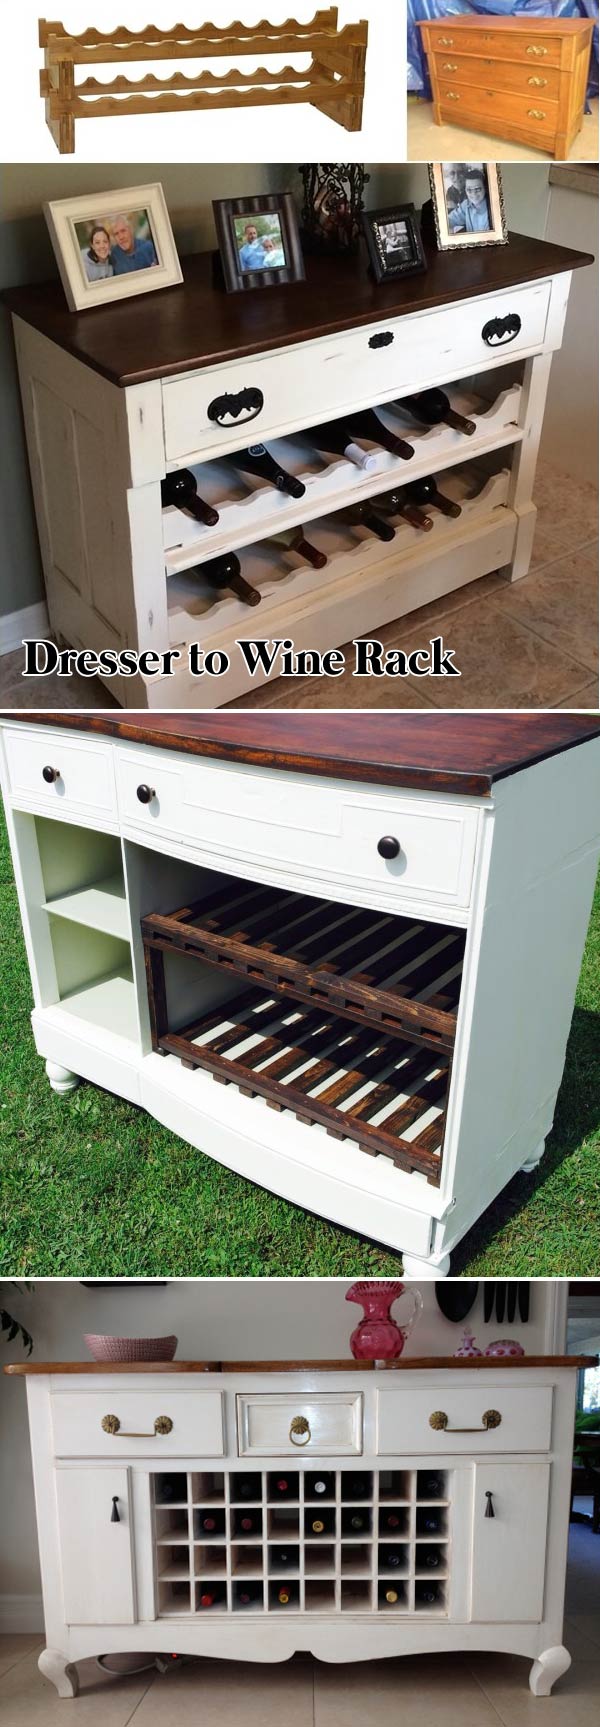 Awesome And Low Budget Ways To Re Purpose Old Furniture Amazing